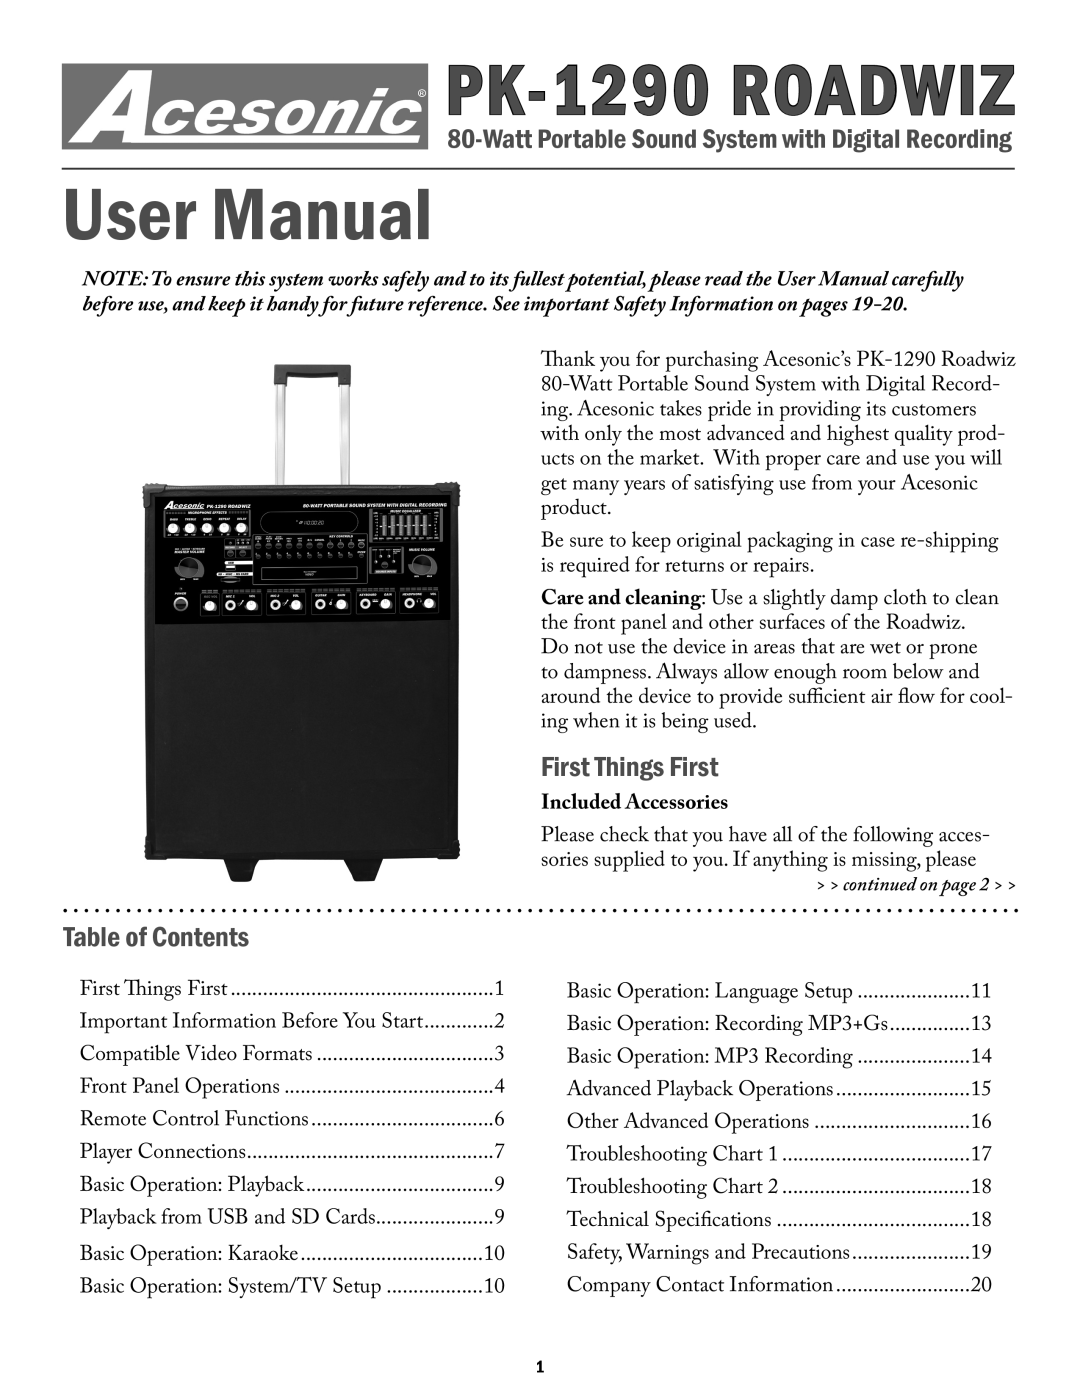 Acesonic user manual First Things First, Table of Contents, Included Accessories, PK-1290ROADWIZ 